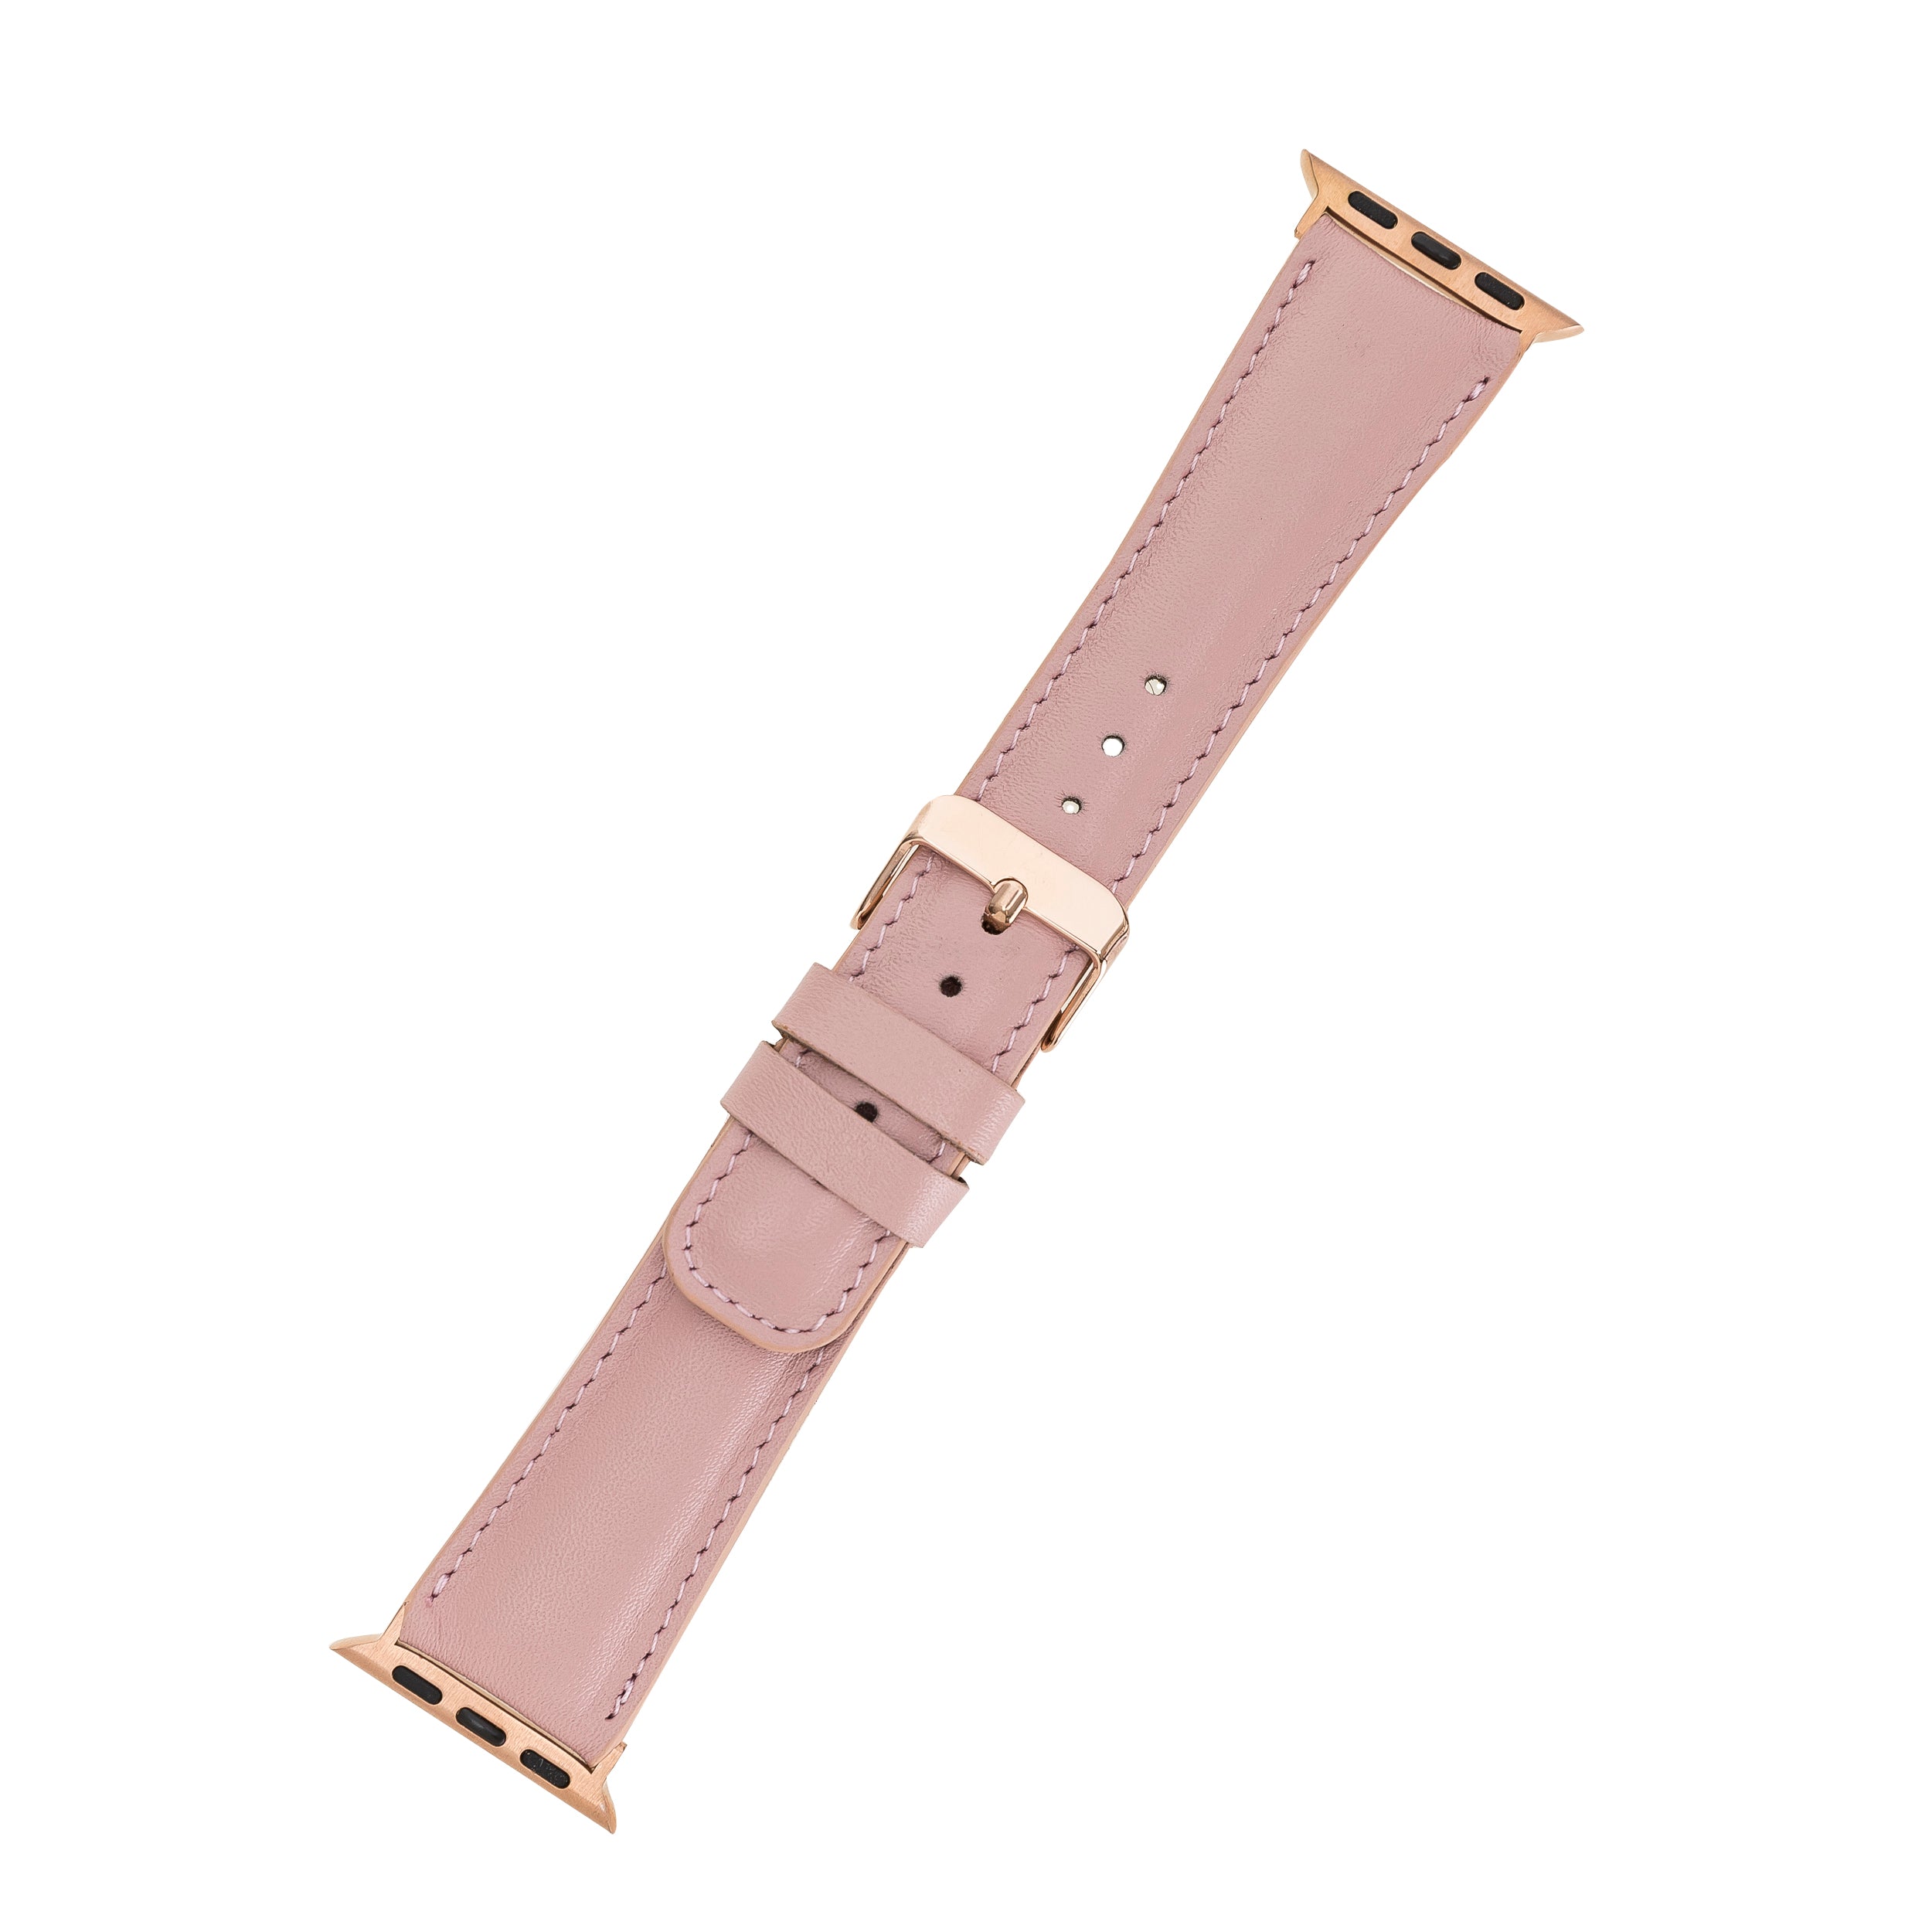  DelfiCase Liverpool Collection Leather Watch Band for Apple & Fitbit Versa Watch Band 12